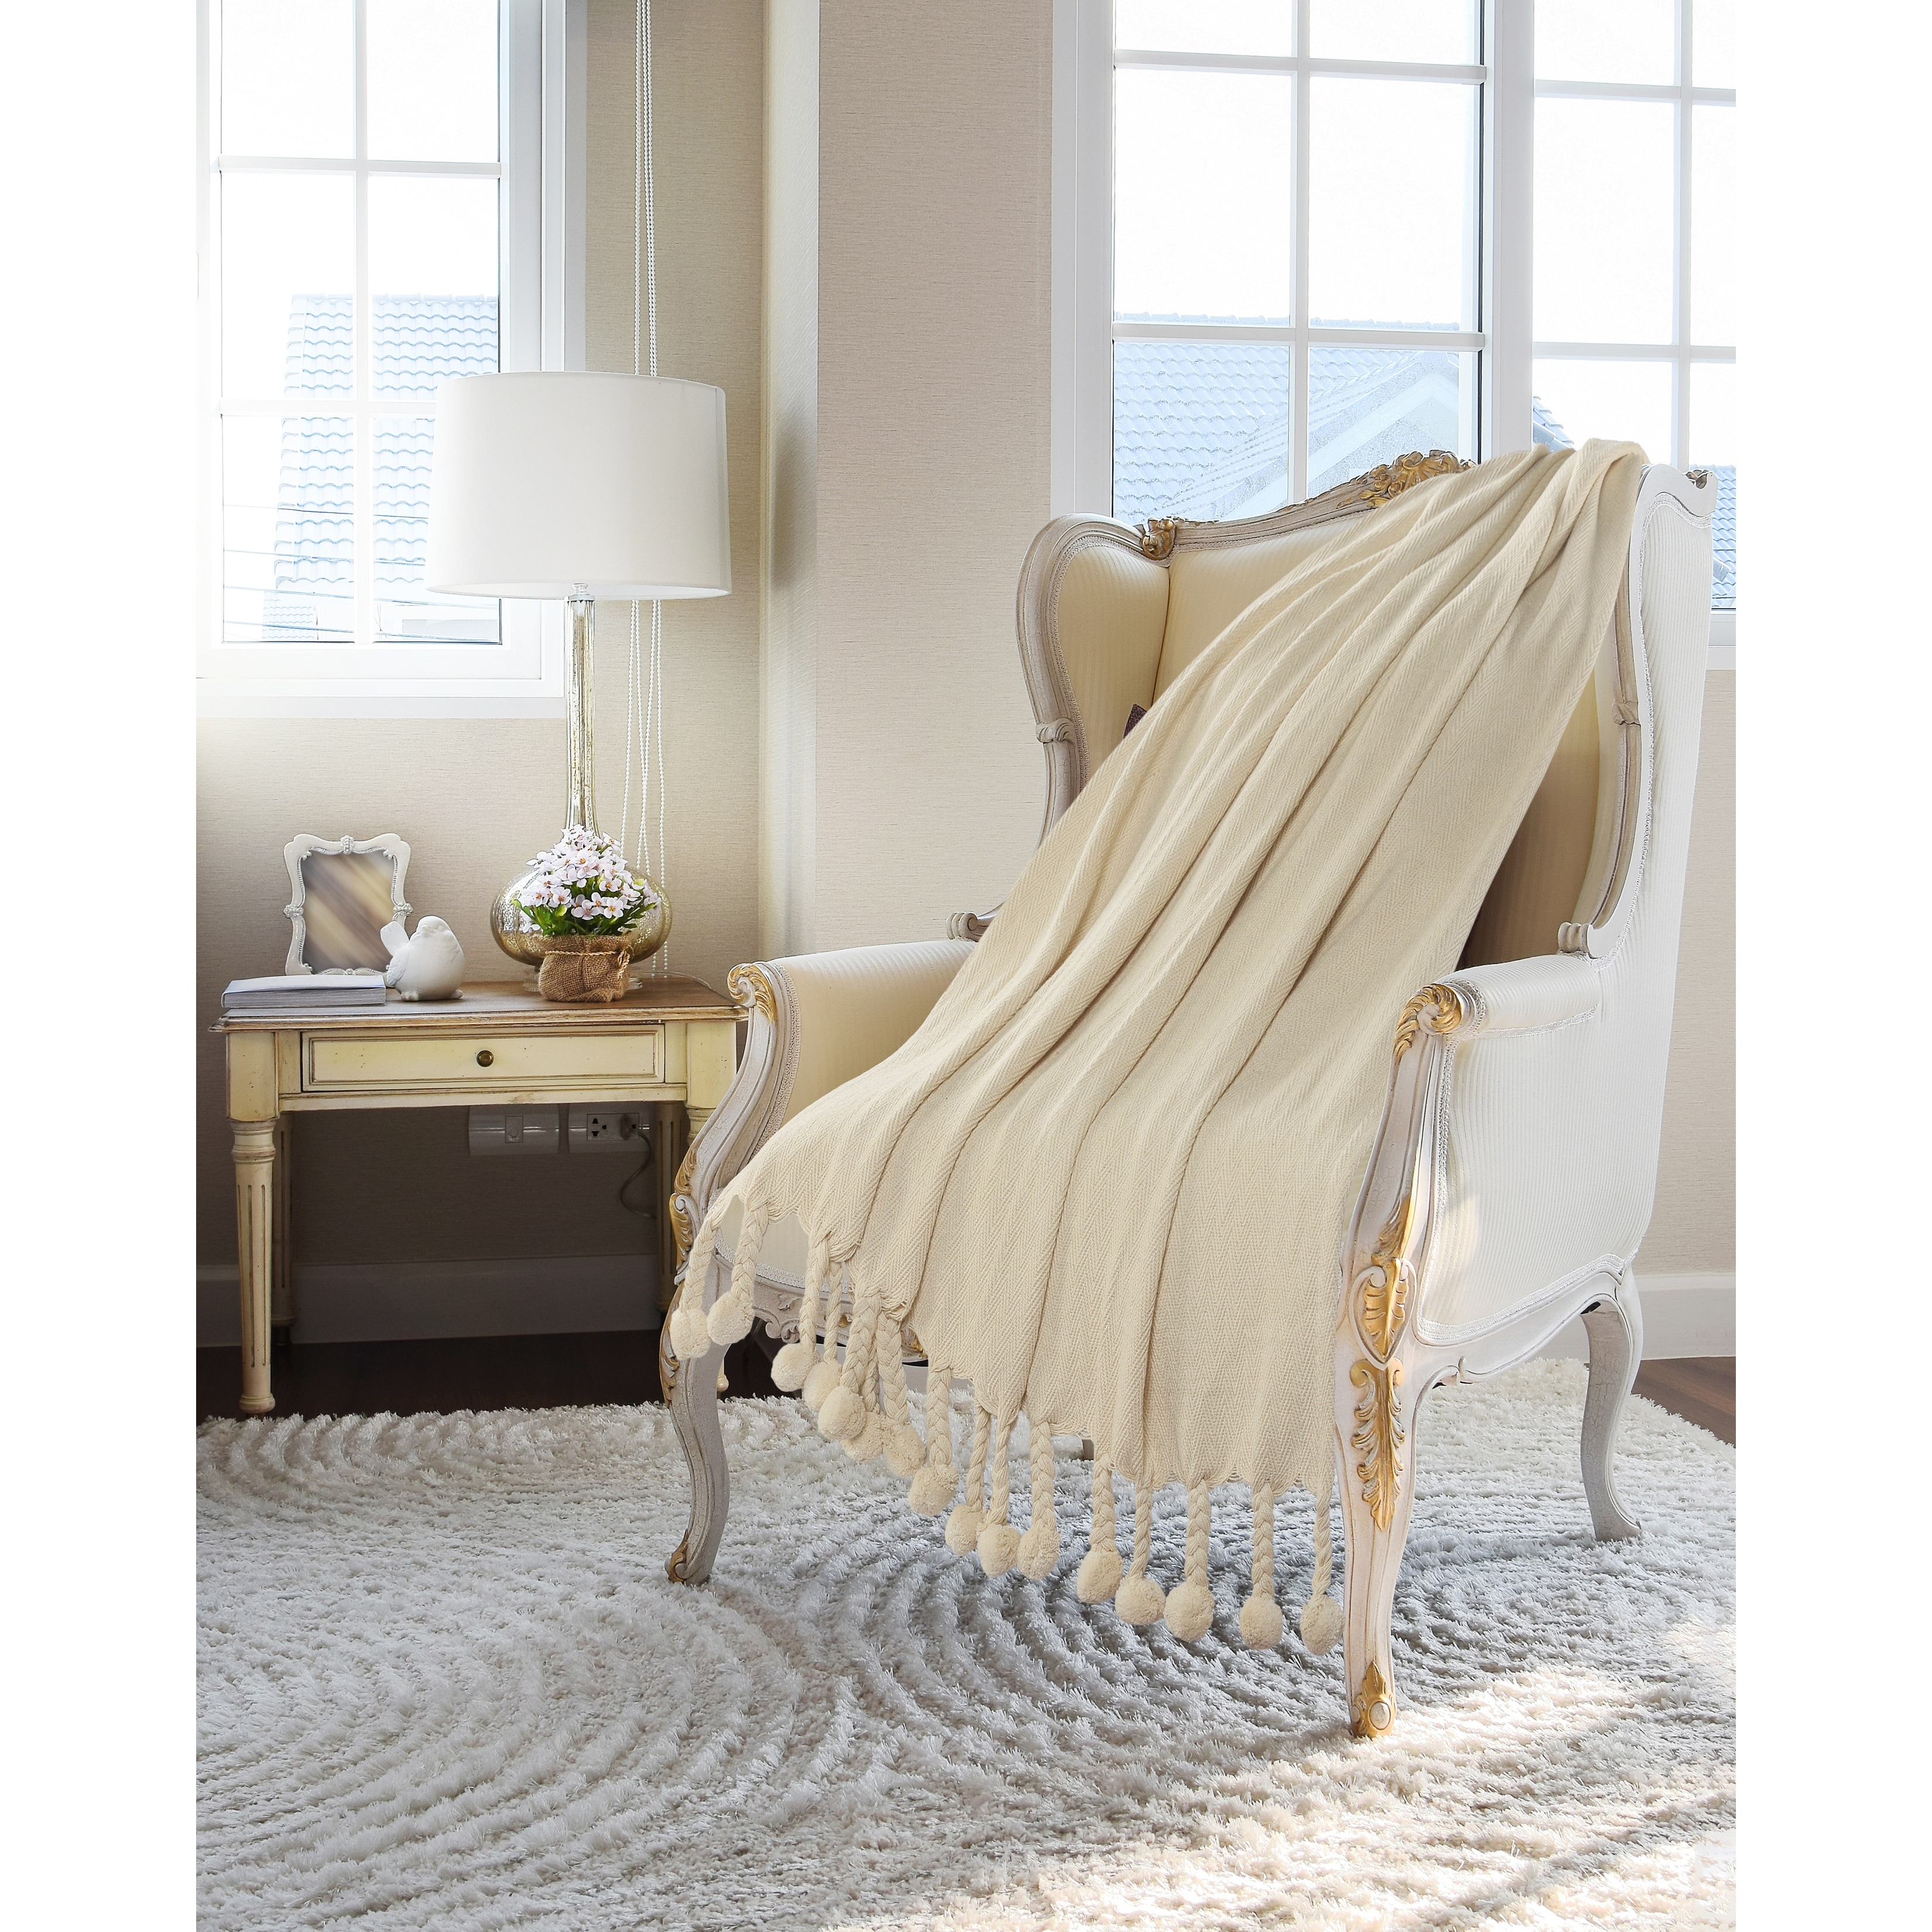 Cream Embroidered Chevron With Braided Fringe Throw Blanket Overstock 31099246